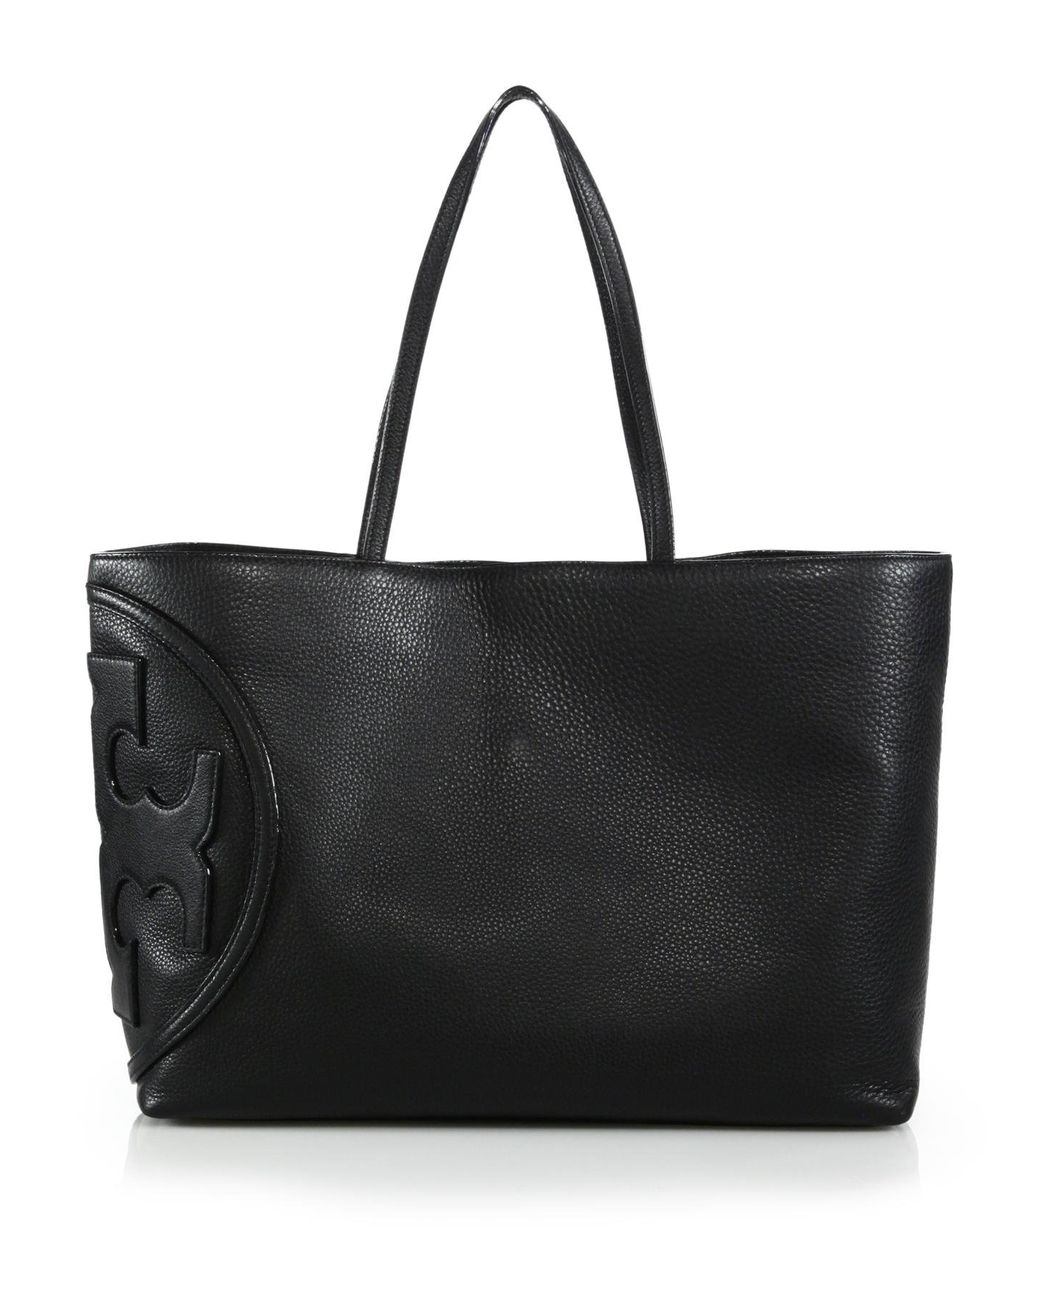 Tory Burch All-t East West Tote in Black | Lyst